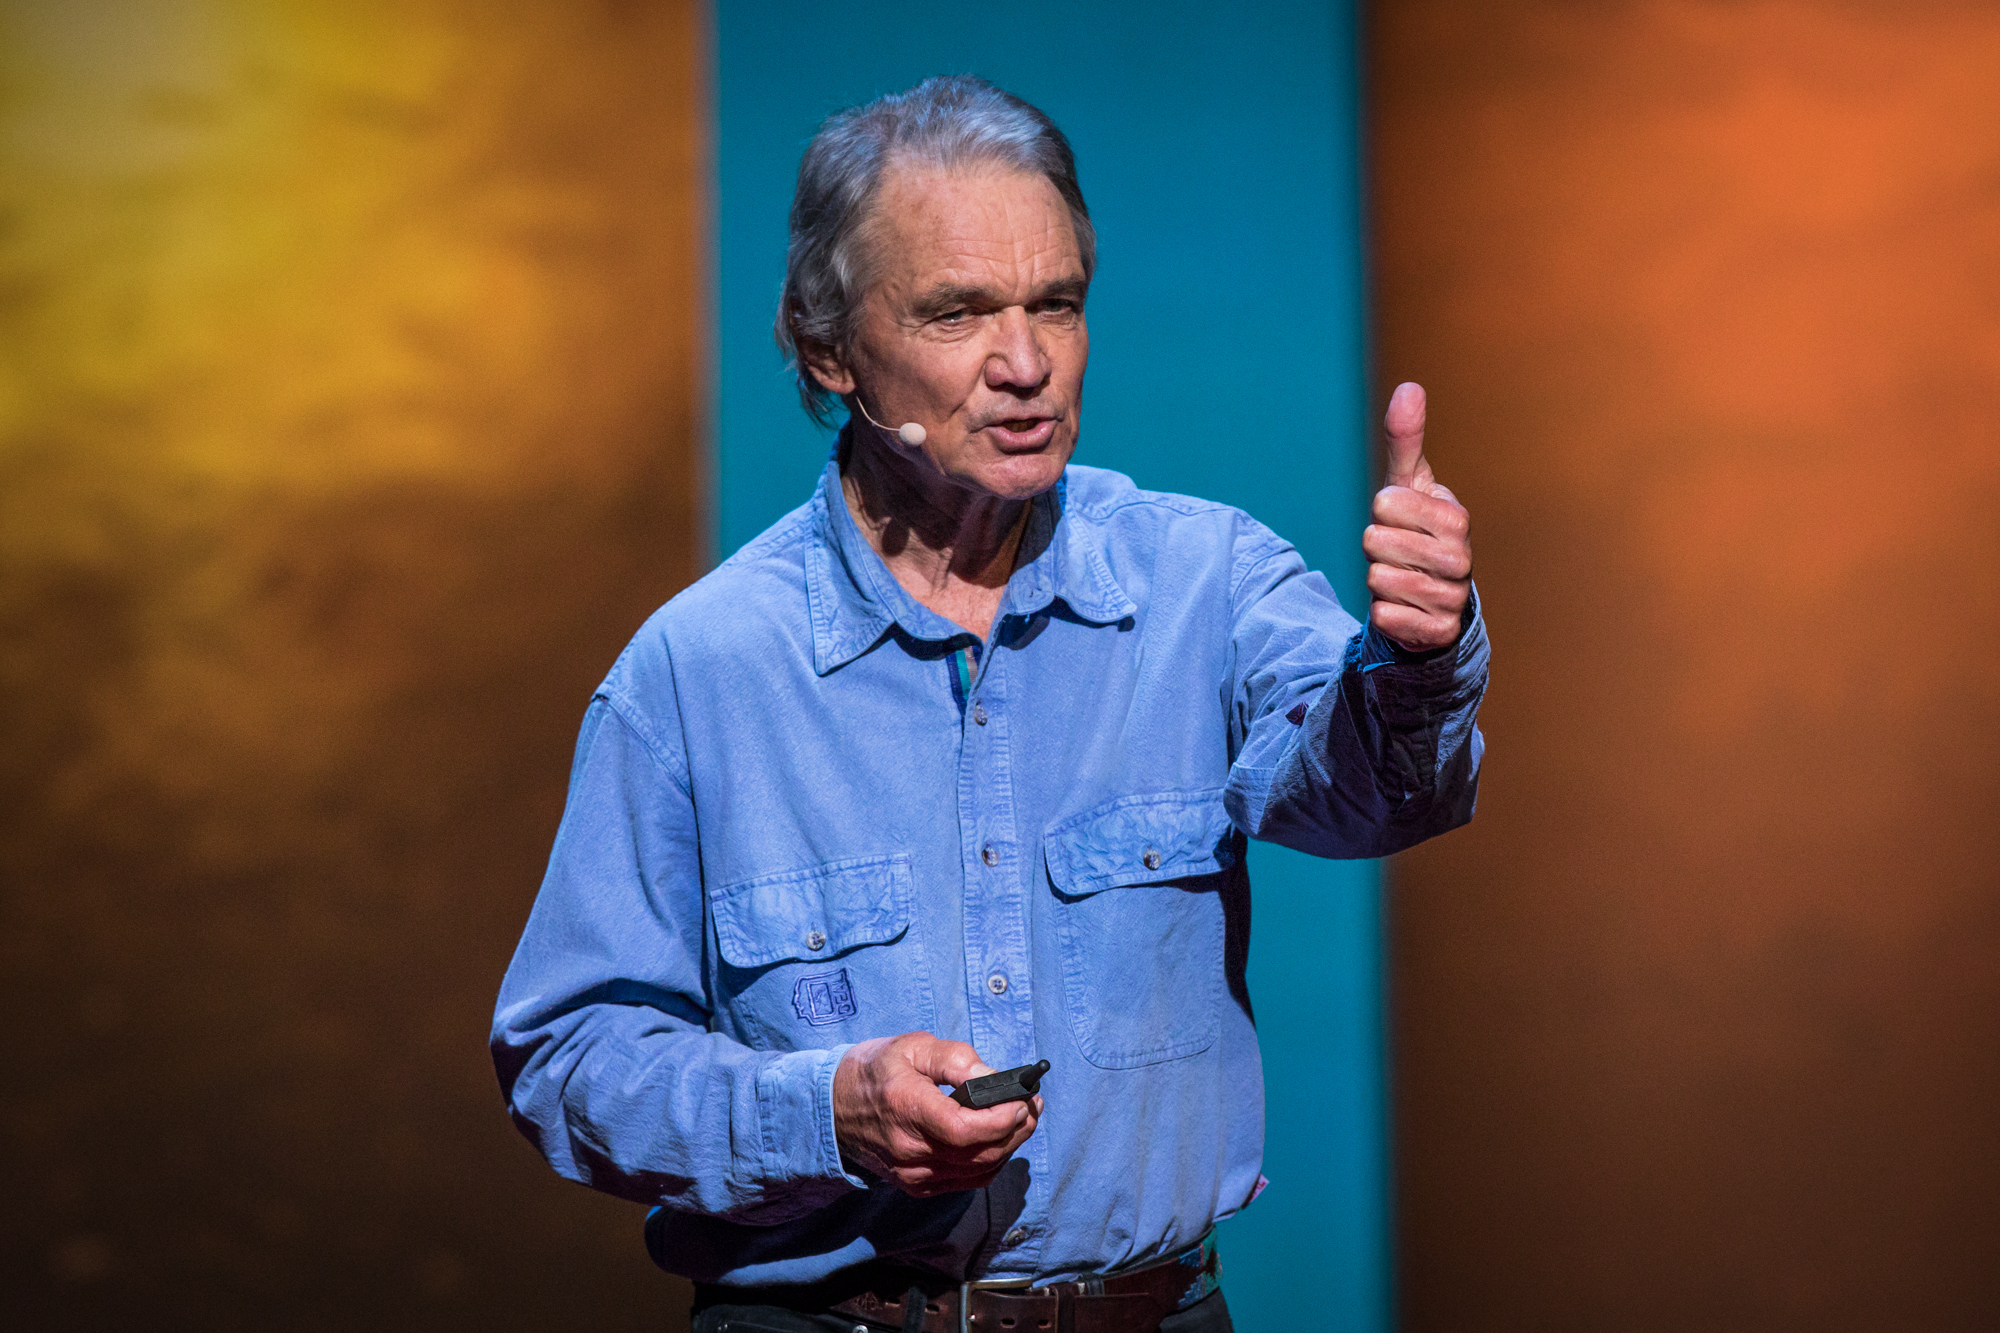 Ian McCallum at TEDWomen 2016 - It's About Time, October 26-28, 2016, Yerba Buena Centre for the Arts, San Francisco, California. Photo: Marla Aufmuth / TED